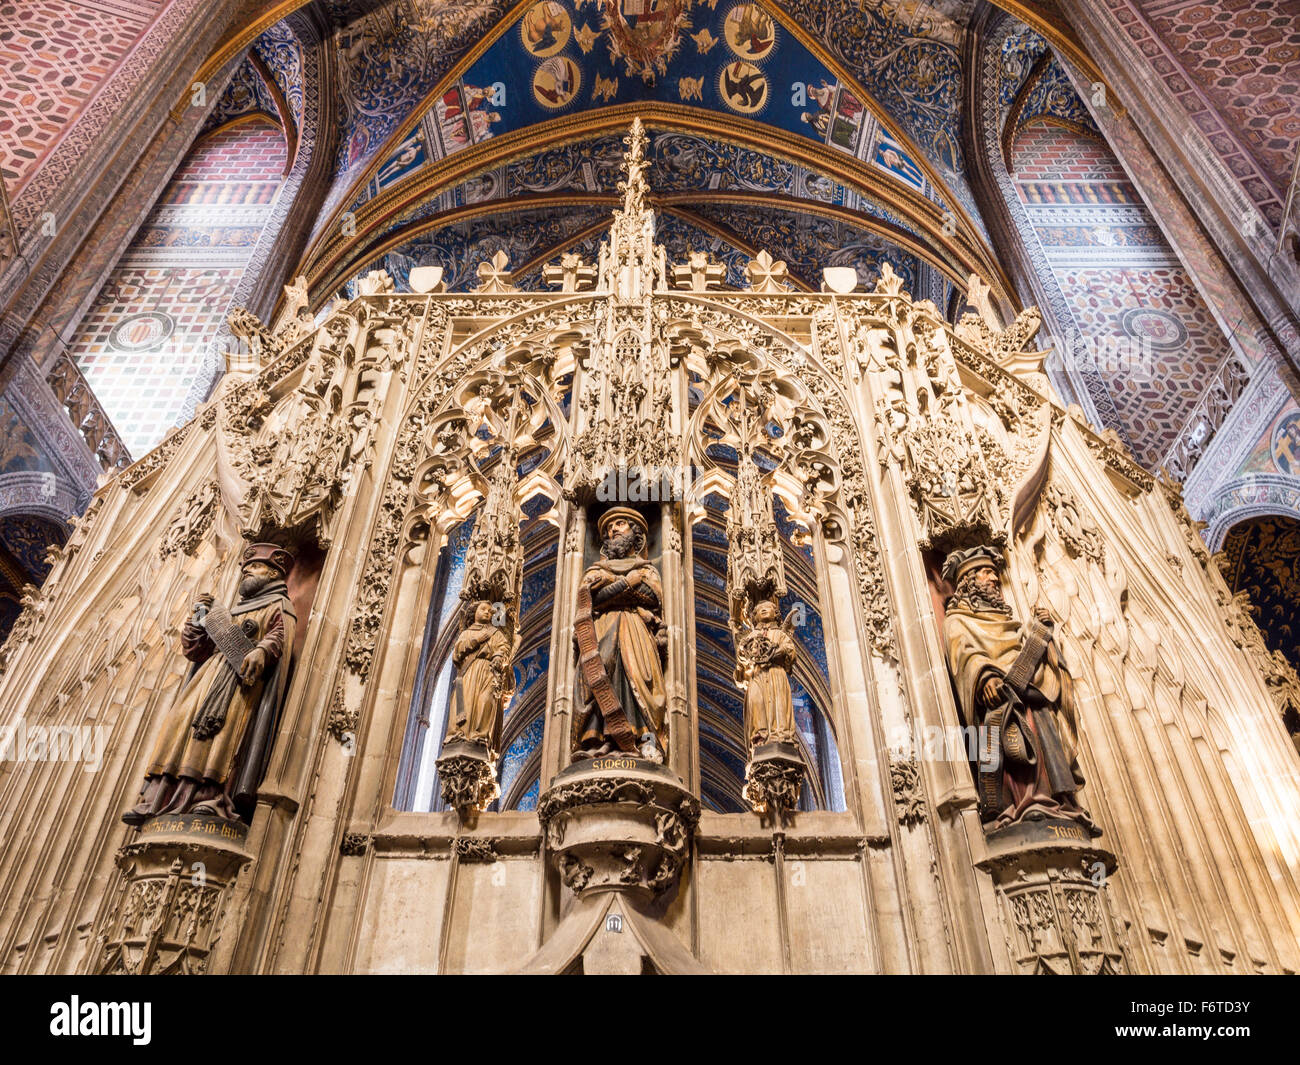 Choir Screen with Simon and Joseph carvings. Wooden statues of Saints Simon and Joseph anchor an ornate carving in the Cathedral Stock Photo